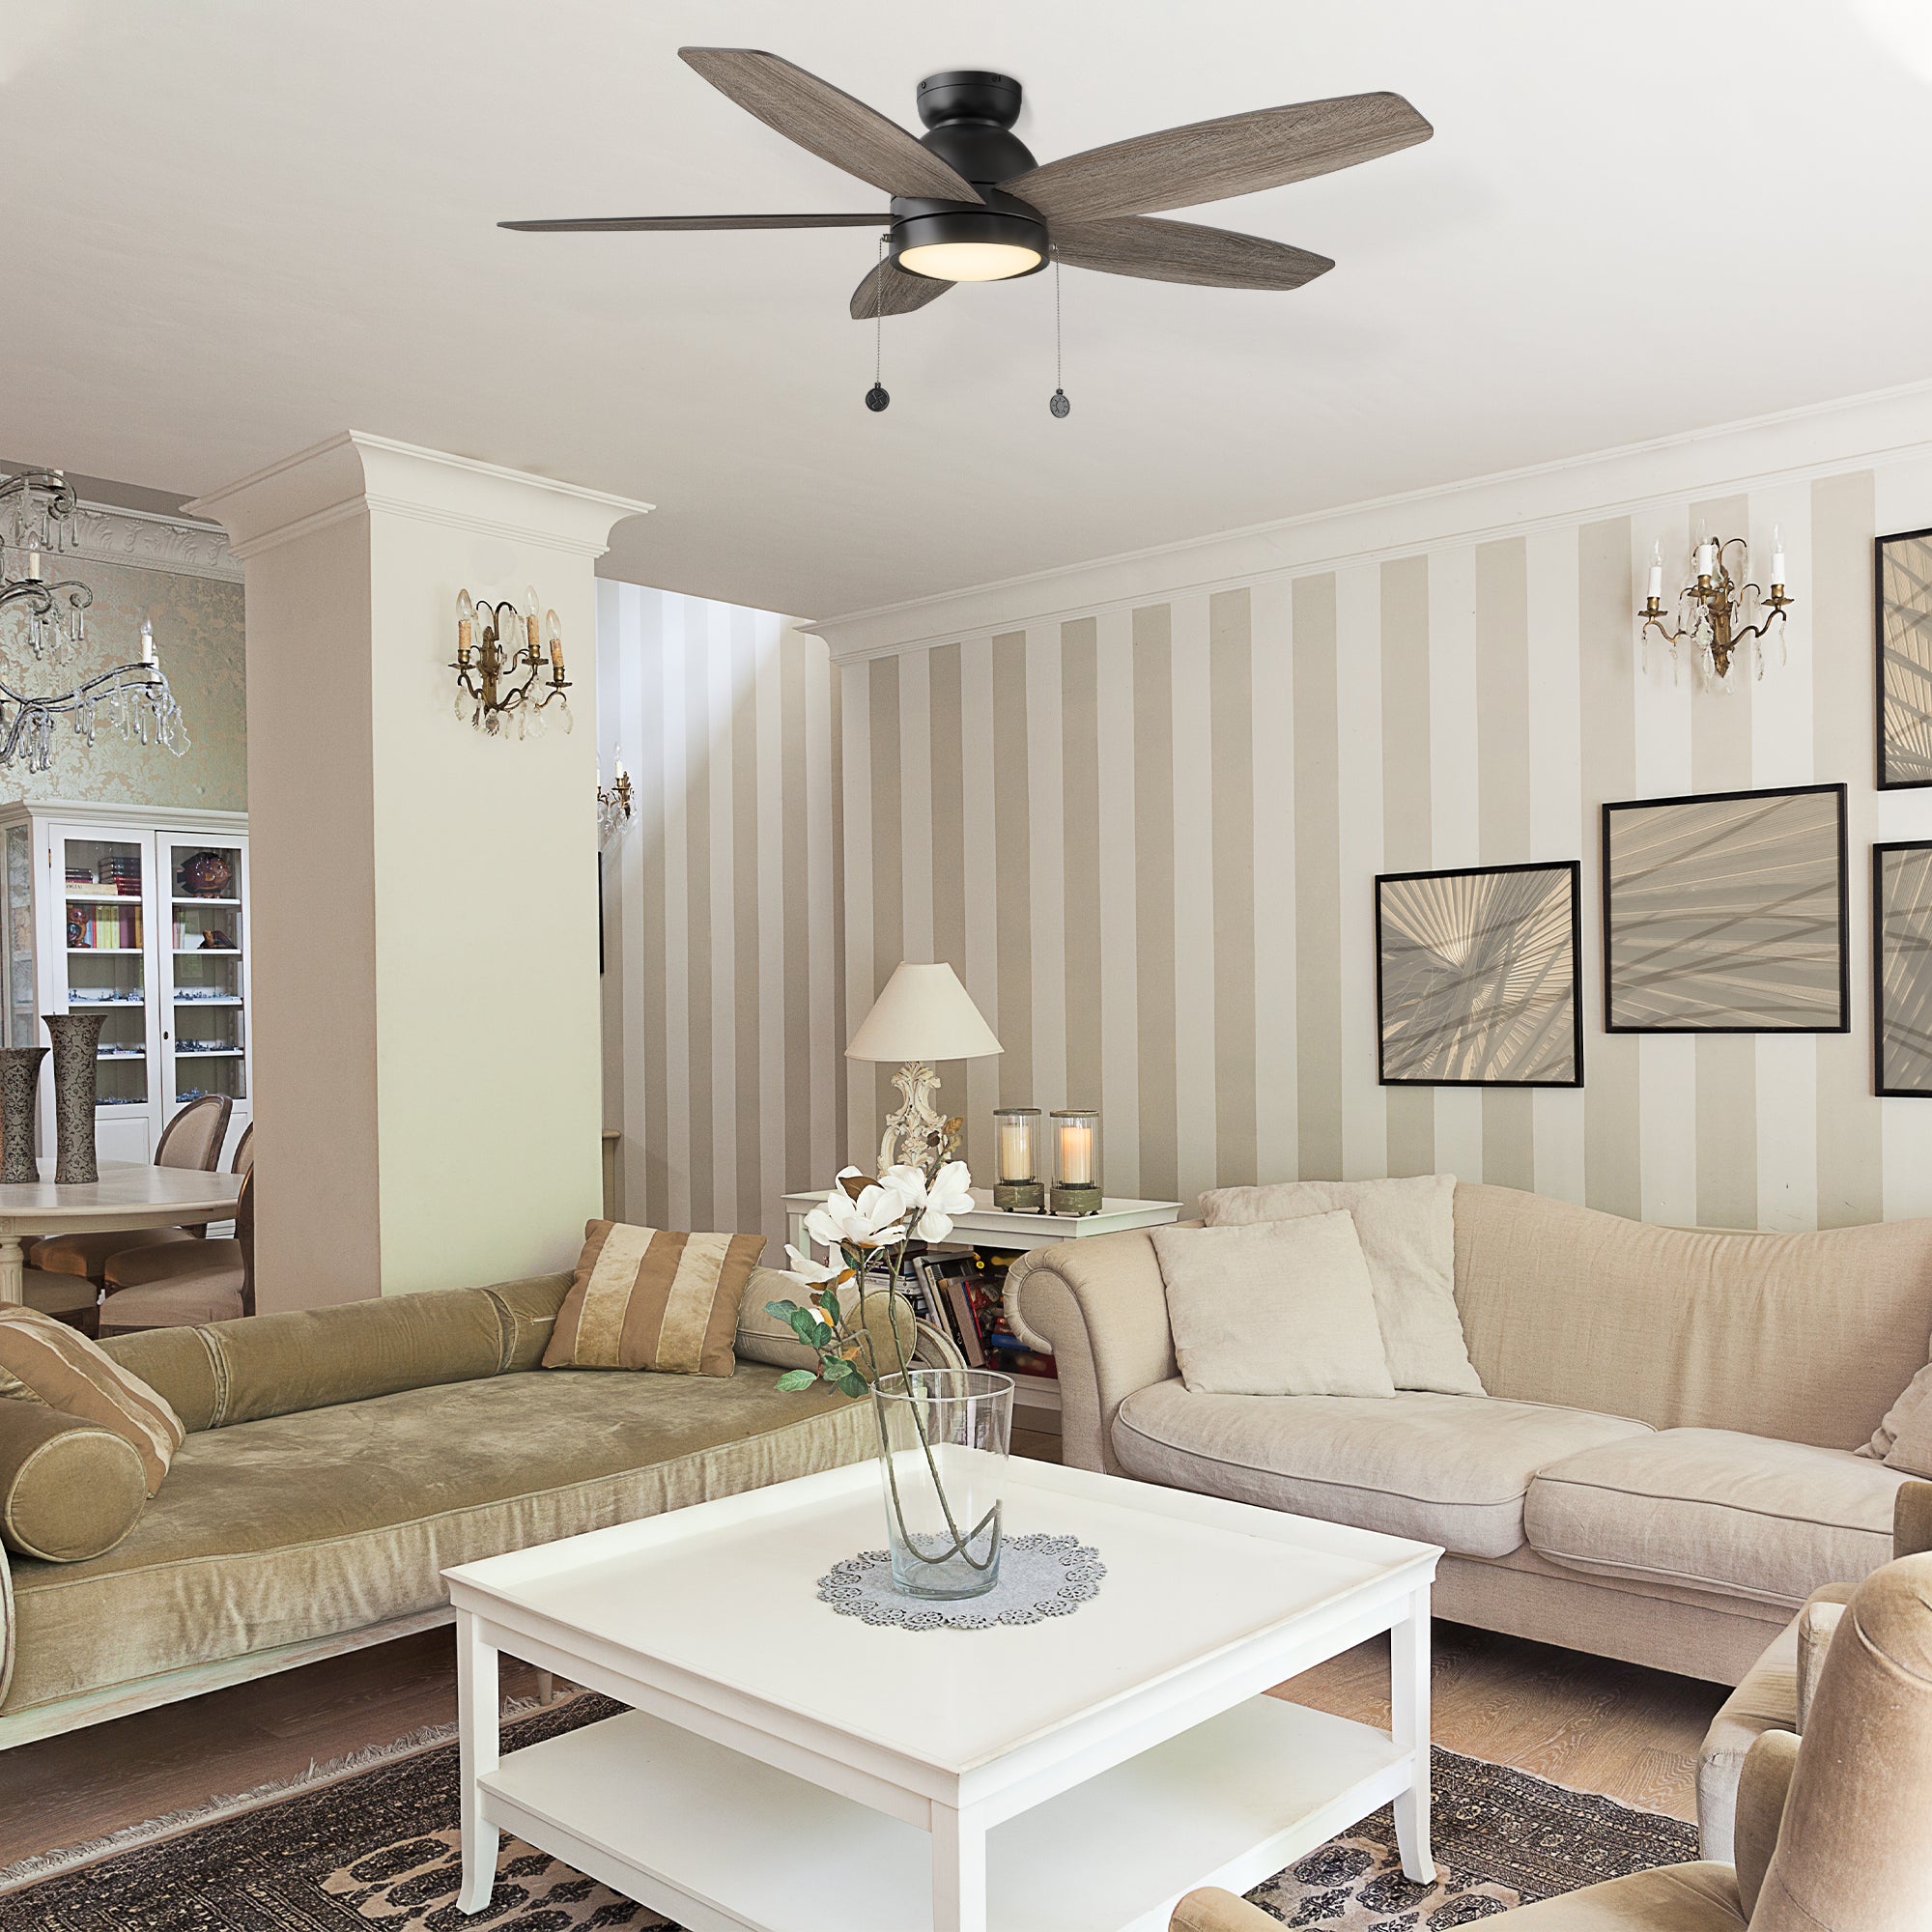 An elegant living room decor featuring the Treyton 52 inch Pull Chain Ceiling Fan with Light Kit. 